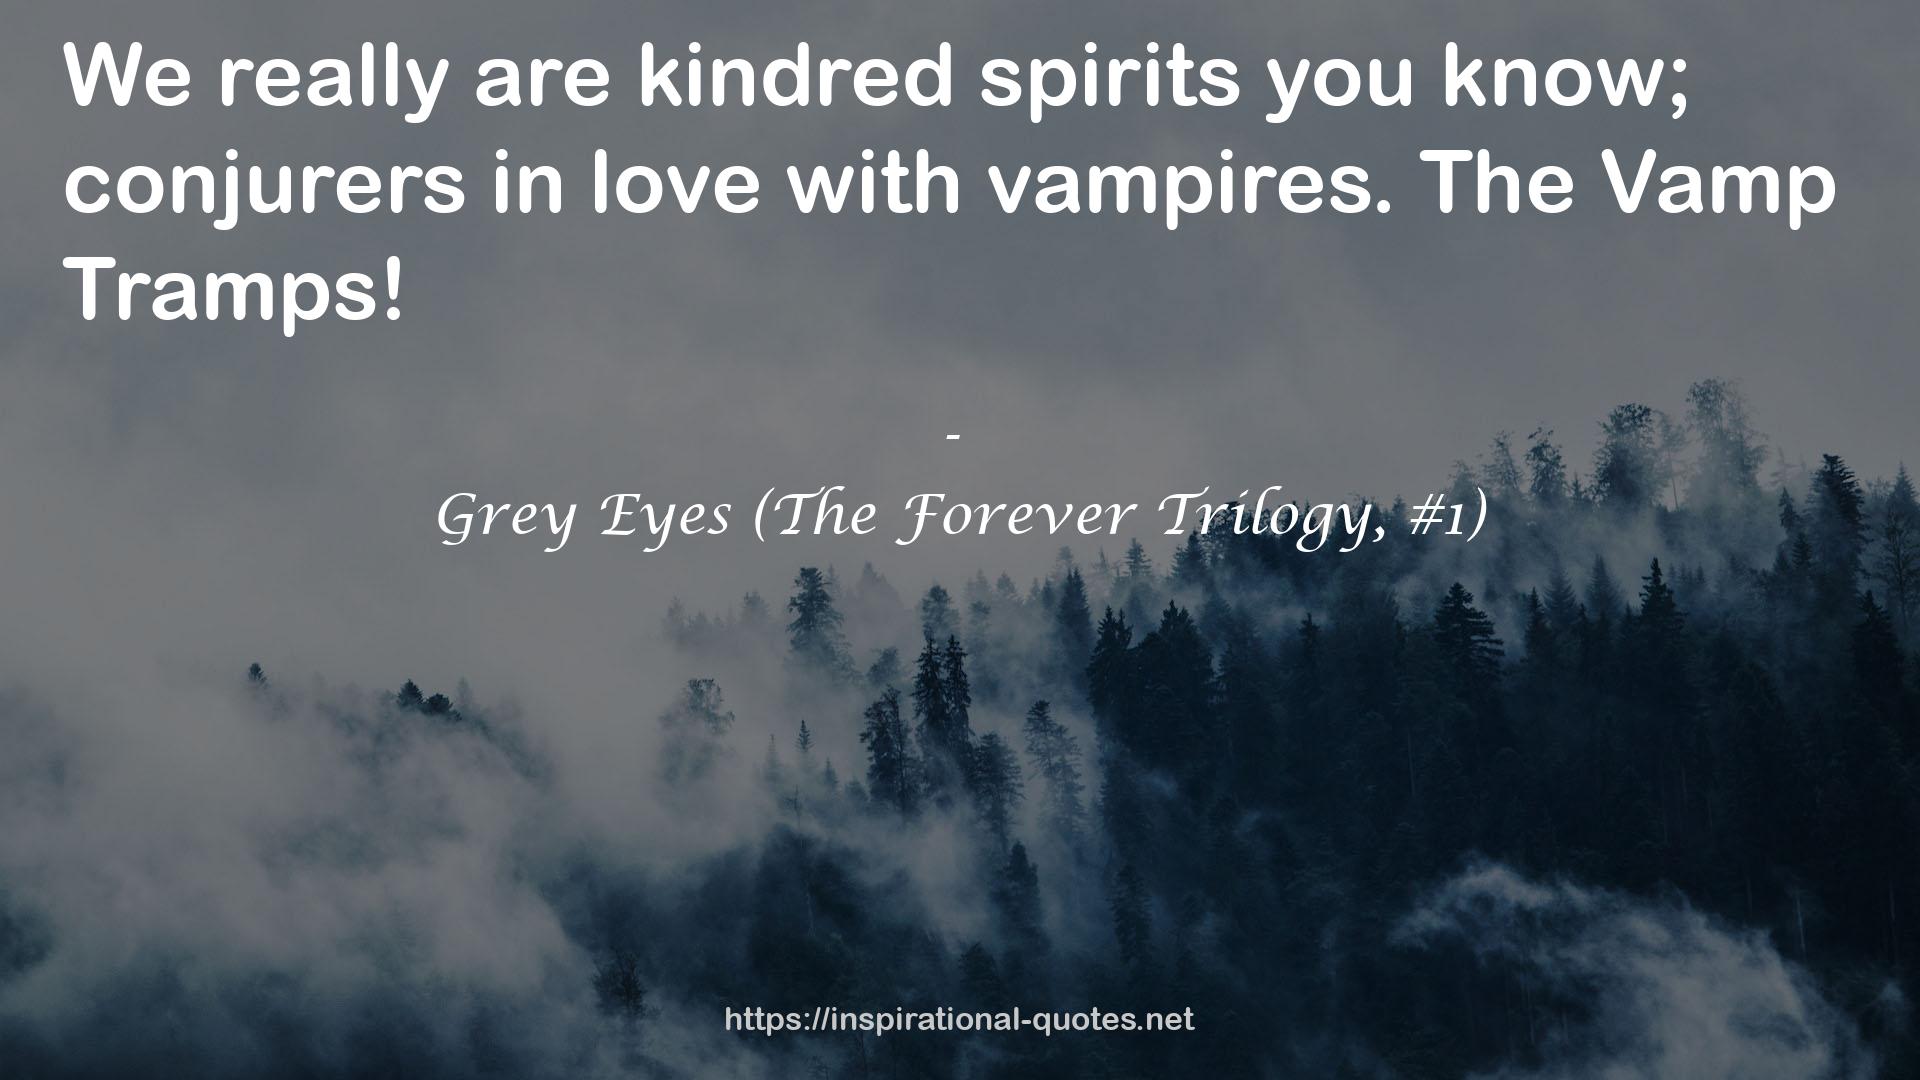 Grey Eyes (The Forever Trilogy, #1) QUOTES